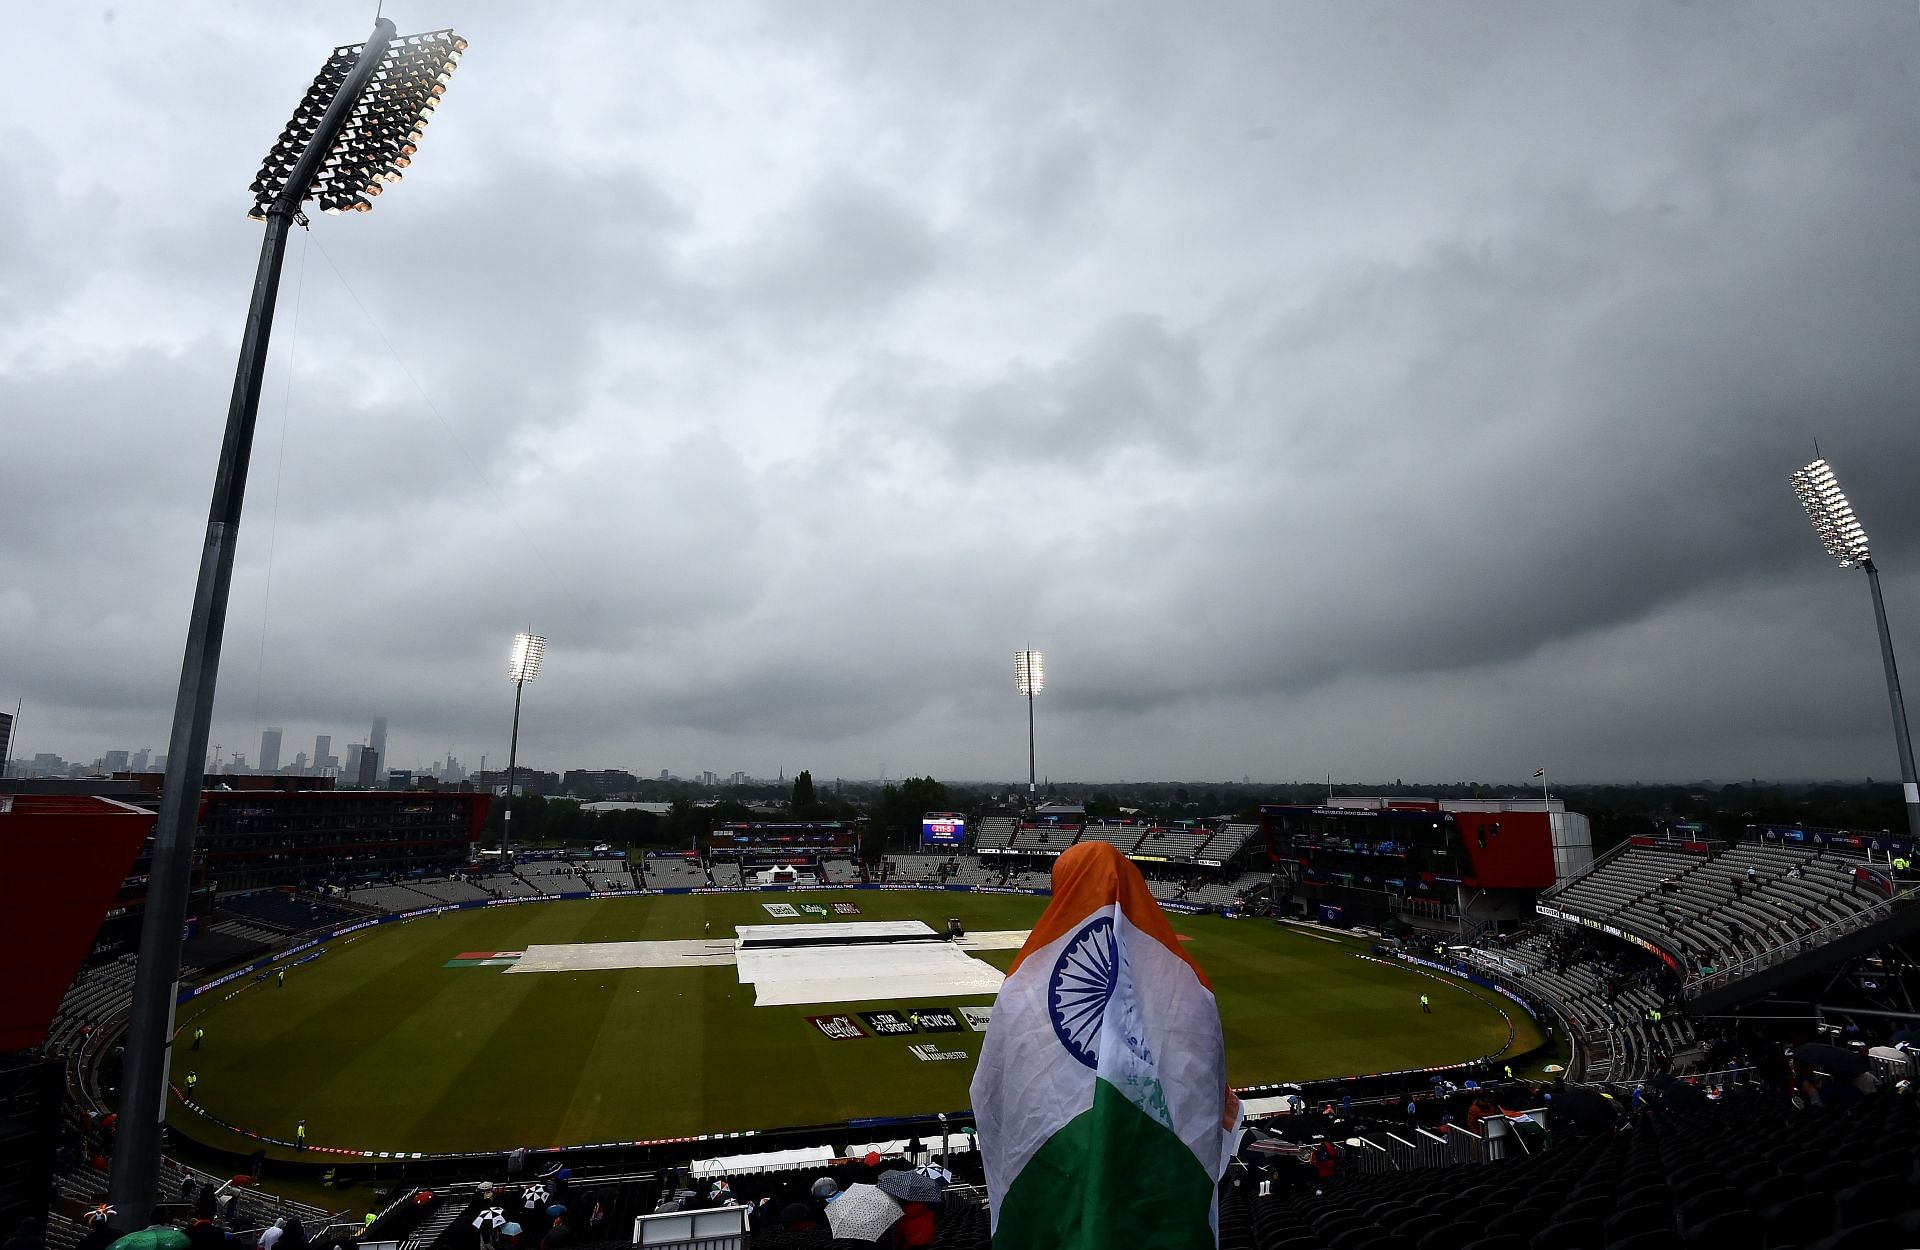 Rain has played its part in semifinal clashes of yore, such as the one between India and New Zealand at Old Trafford in 2019.